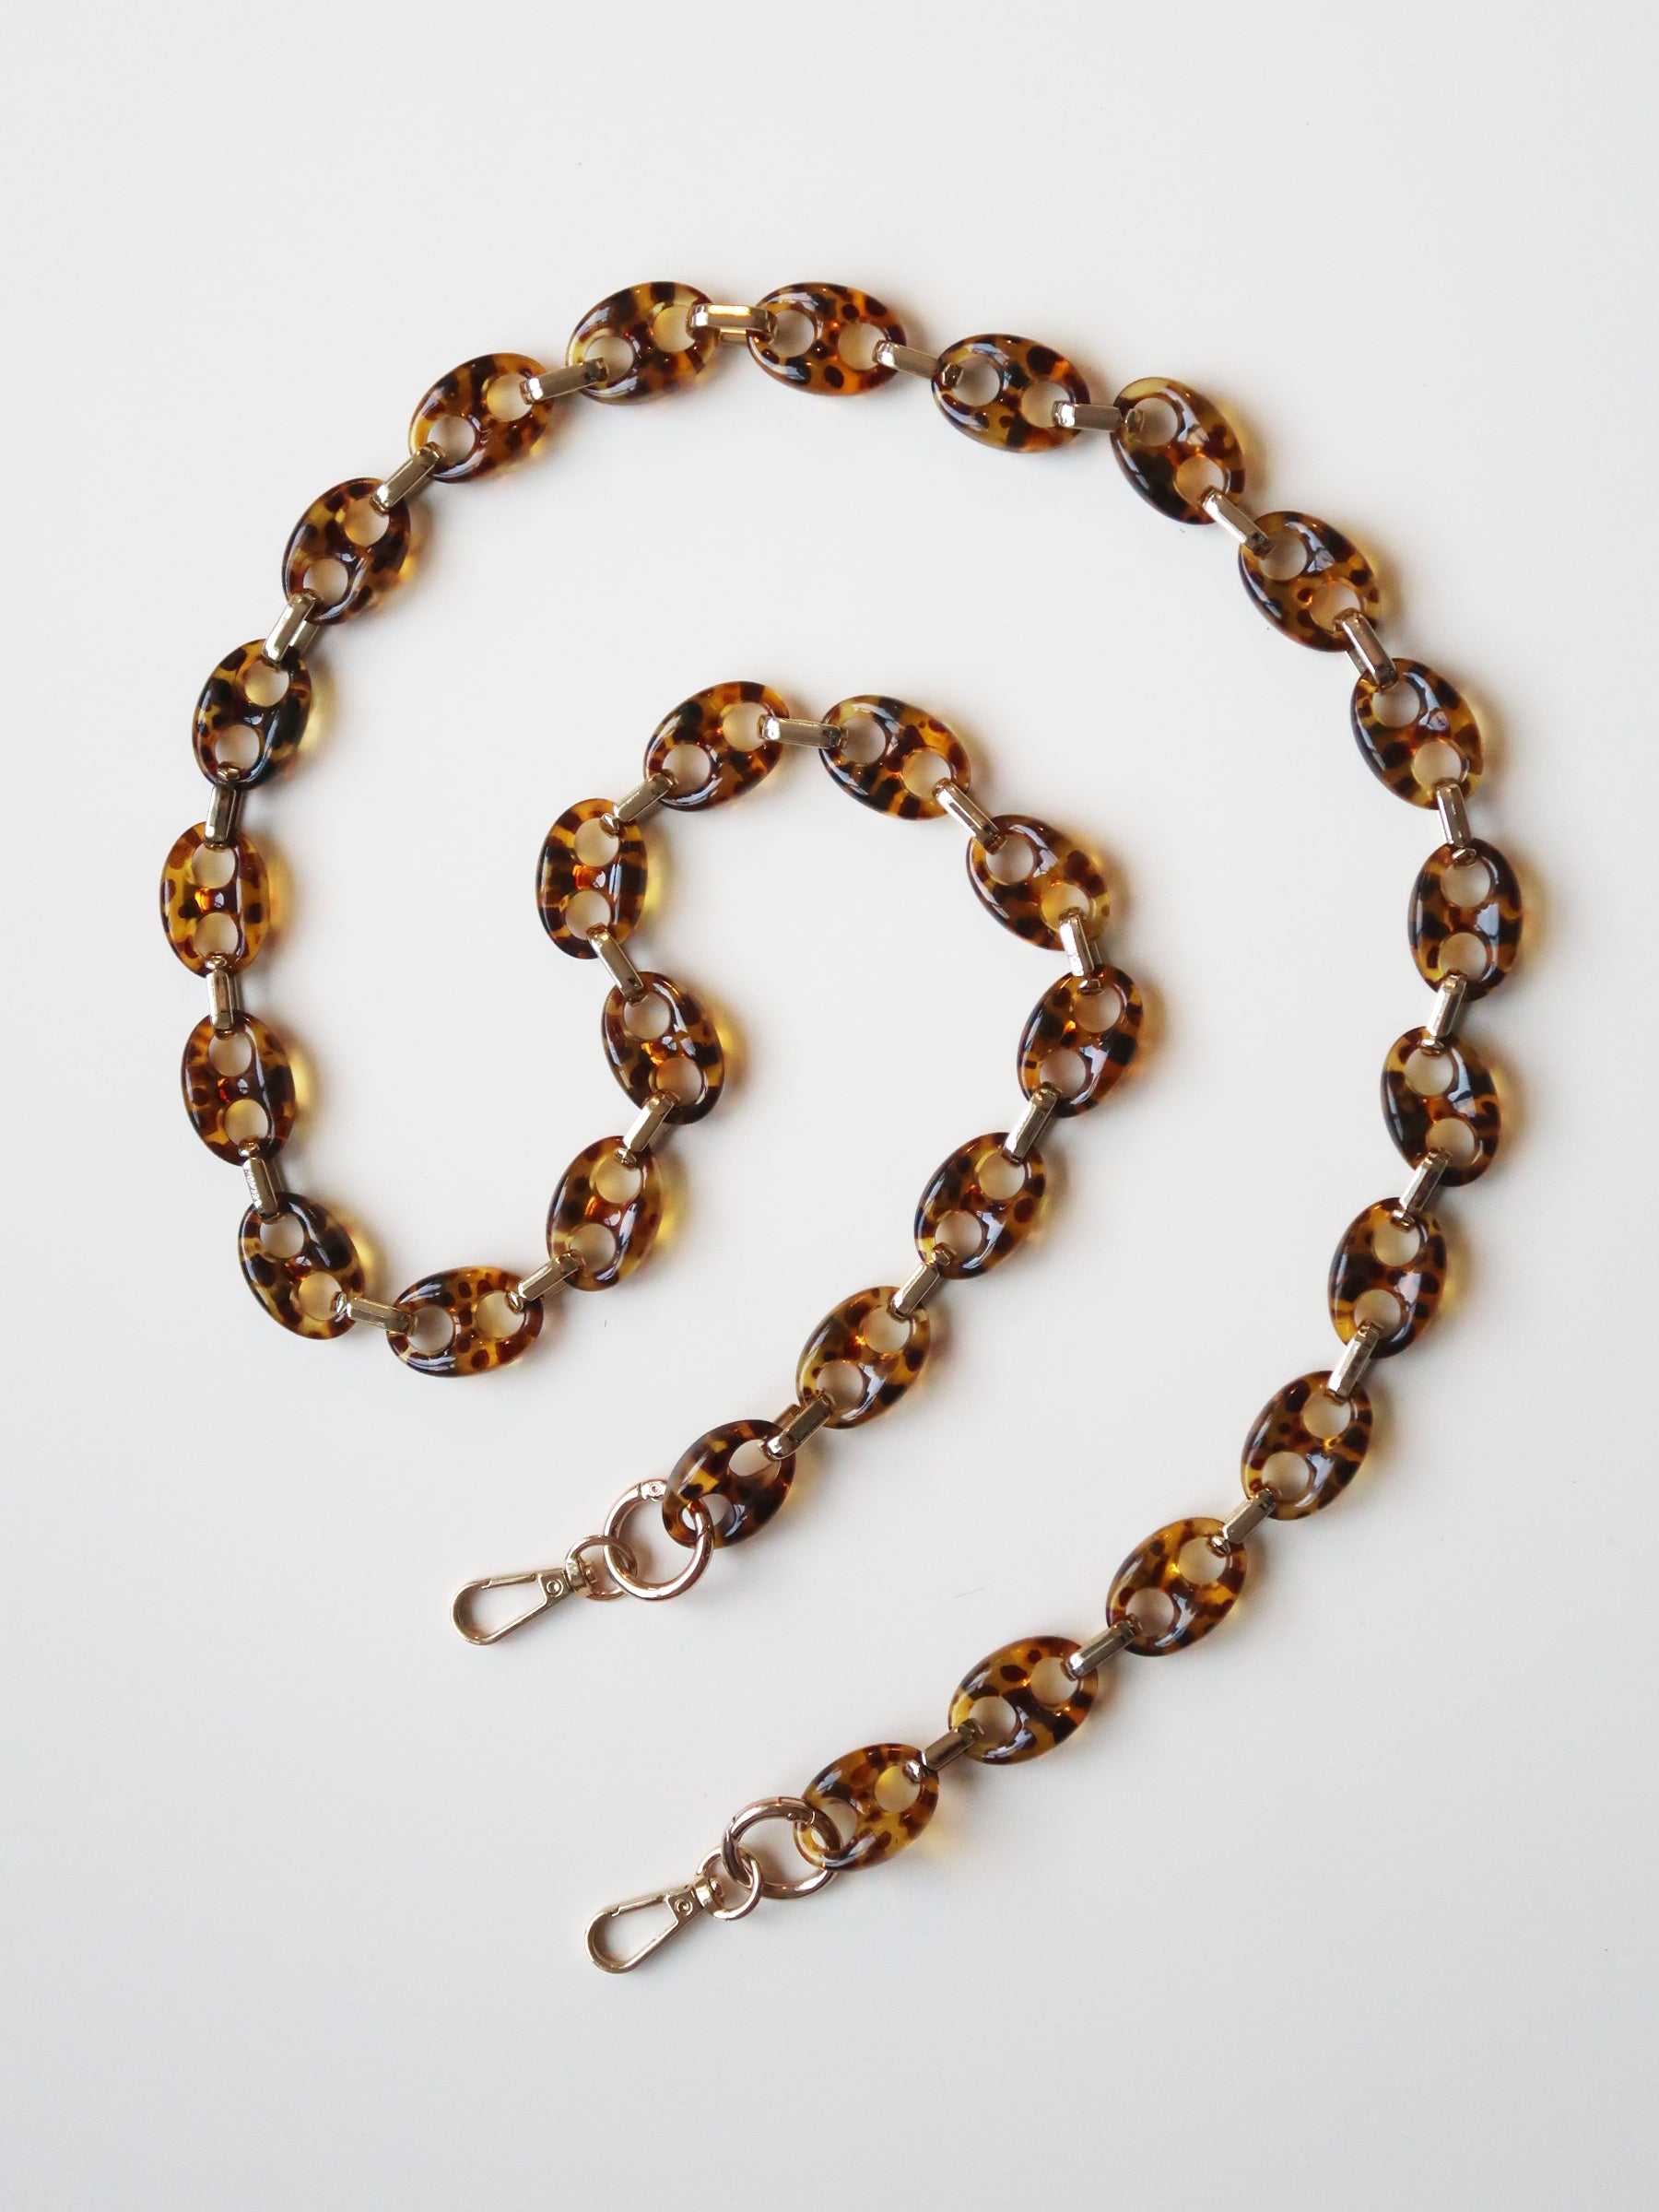 Brown Tortoiseshell Resin and Metal long Chain phone accessories